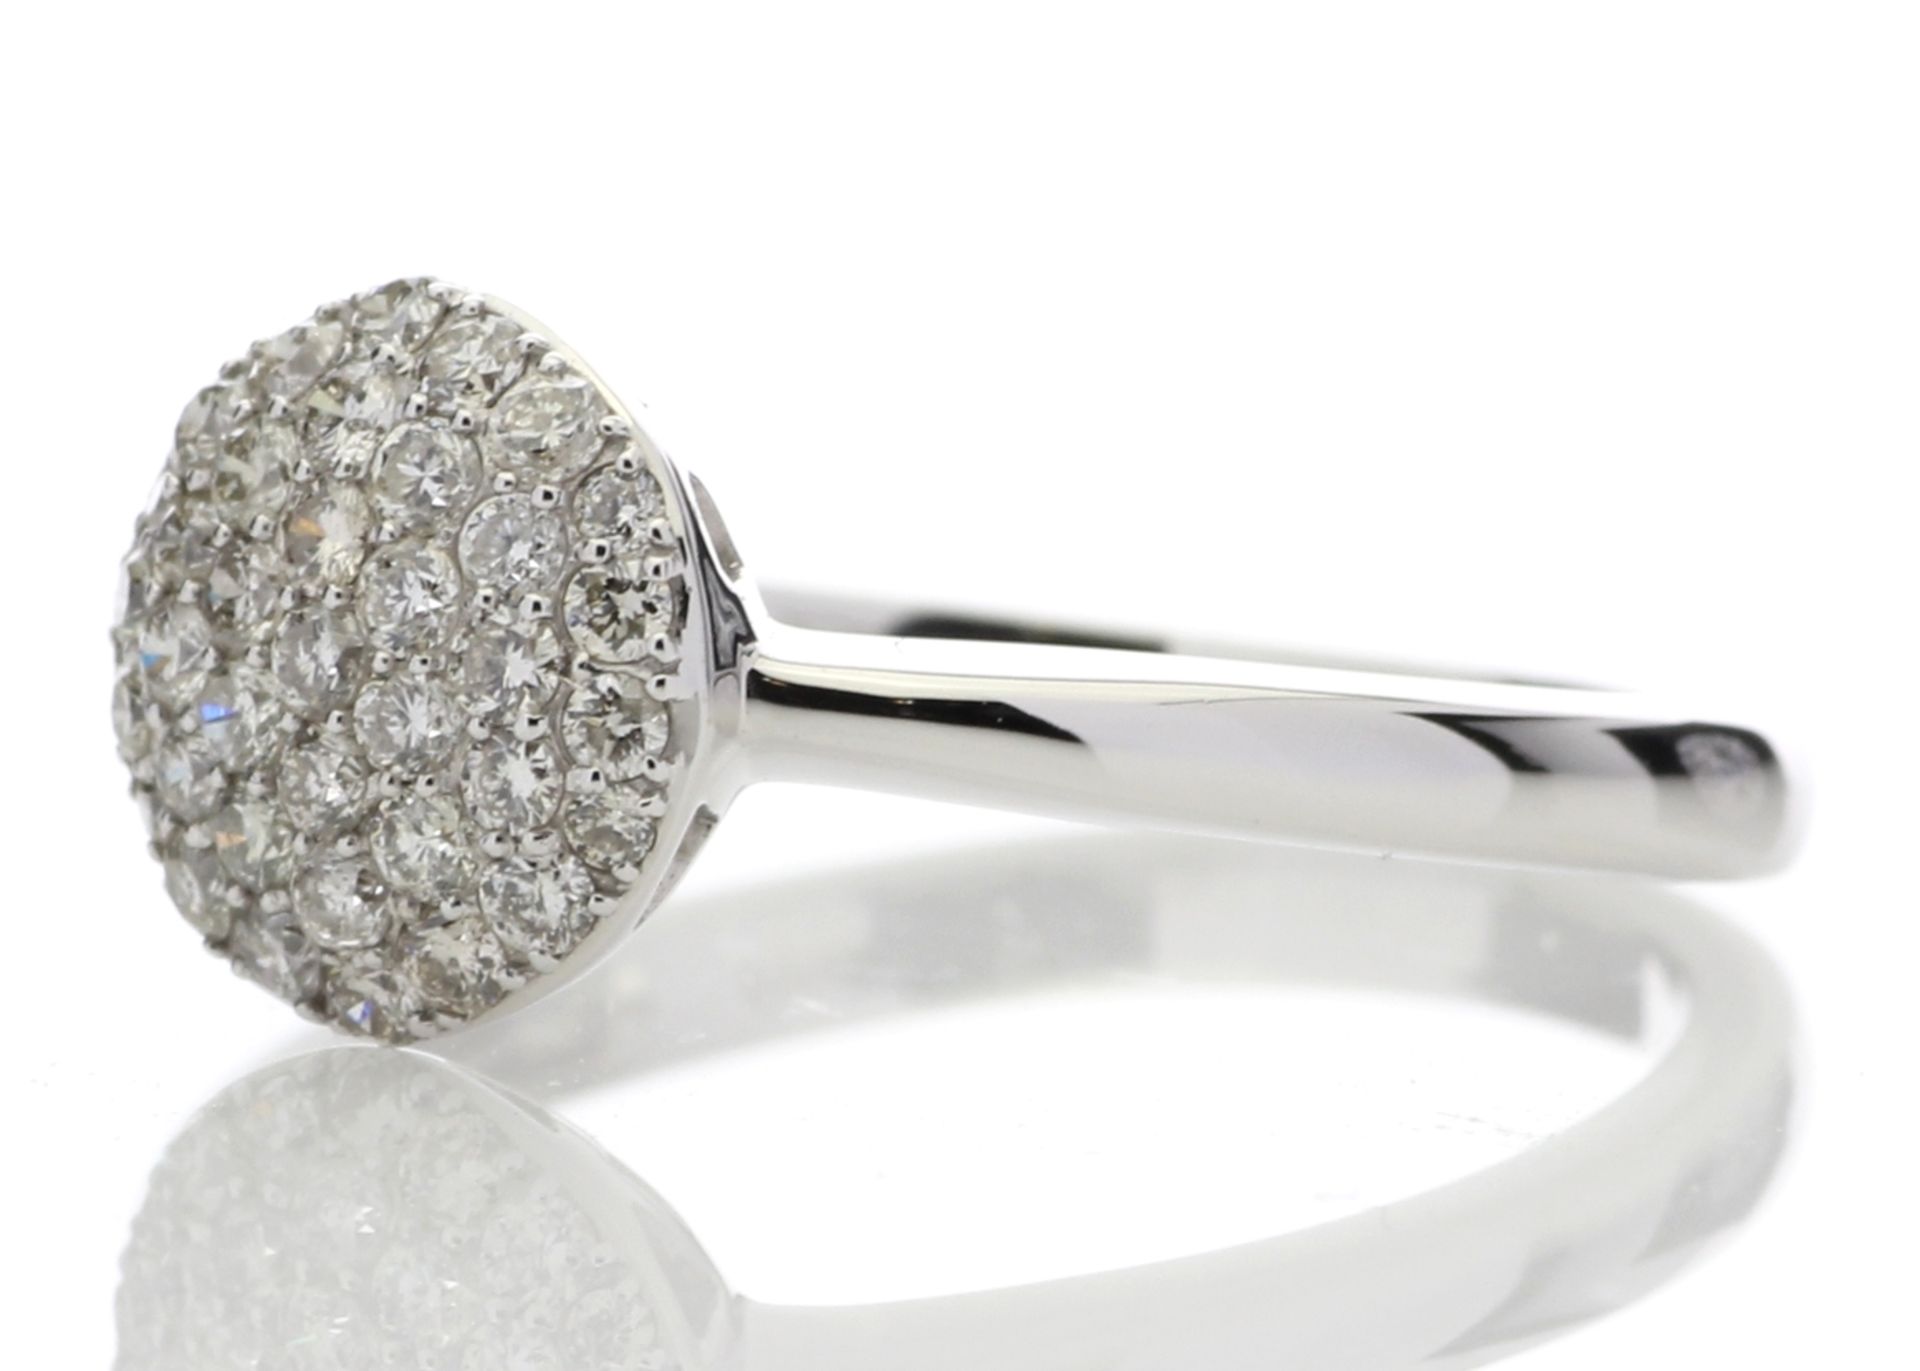 9ct White Gold Diamond Cluster Ring 0.51 Carats - Valued by GIE £4,895.00 - 9ct White Gold Diamond - Image 2 of 5